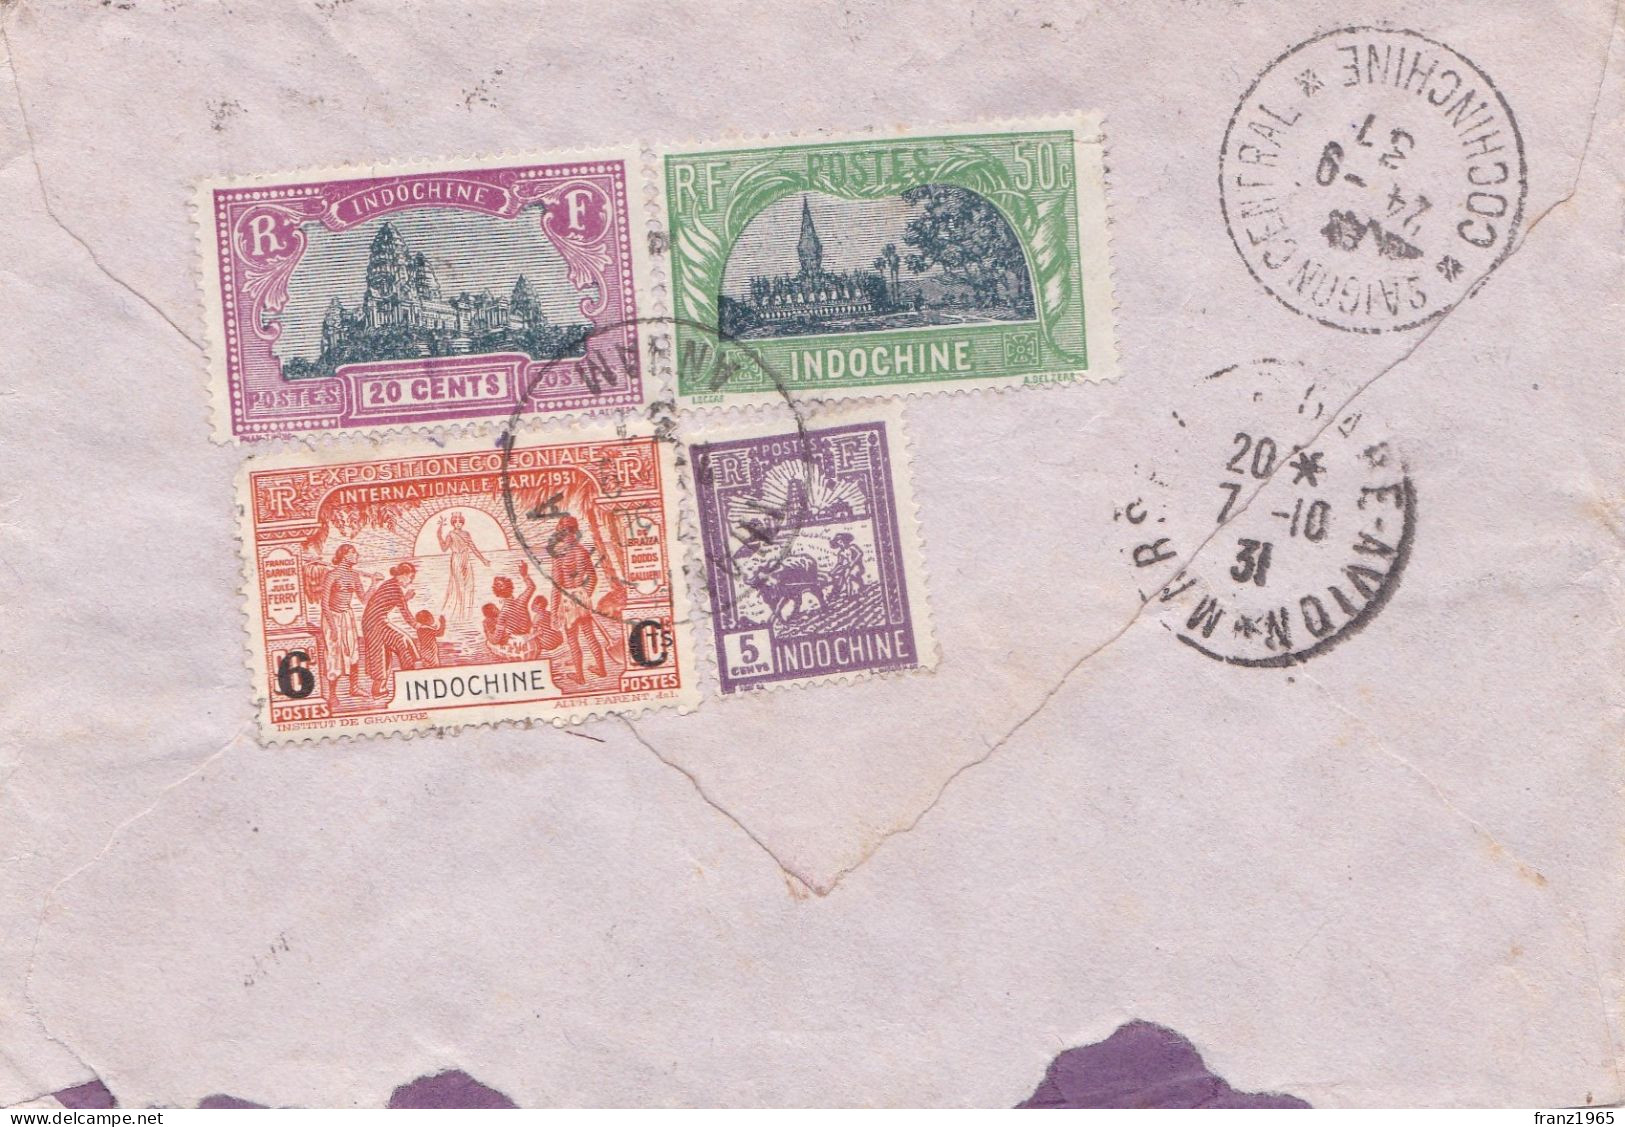 From Indochina To France - 1931 (Thanh-Hoa) - Covers & Documents